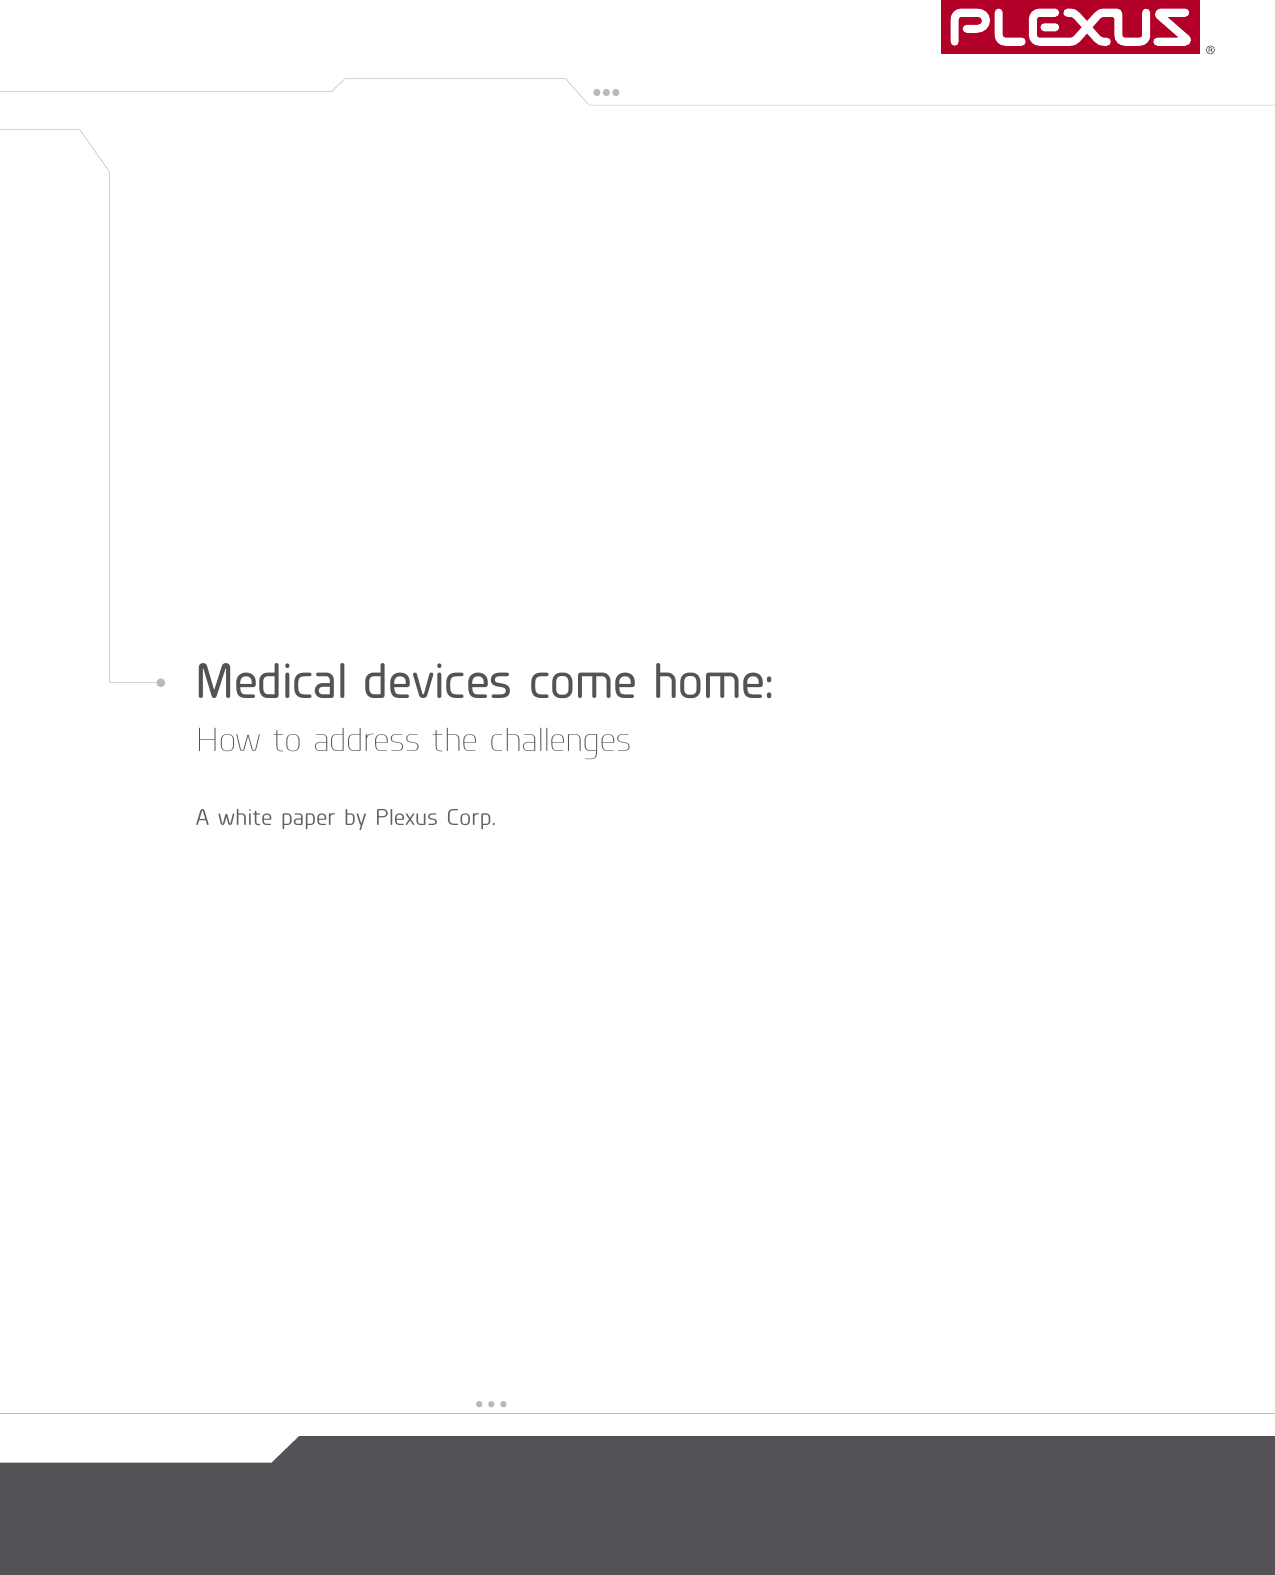 Page 1 of 12 - Addressing-the-challenges-of-home-medical-devices